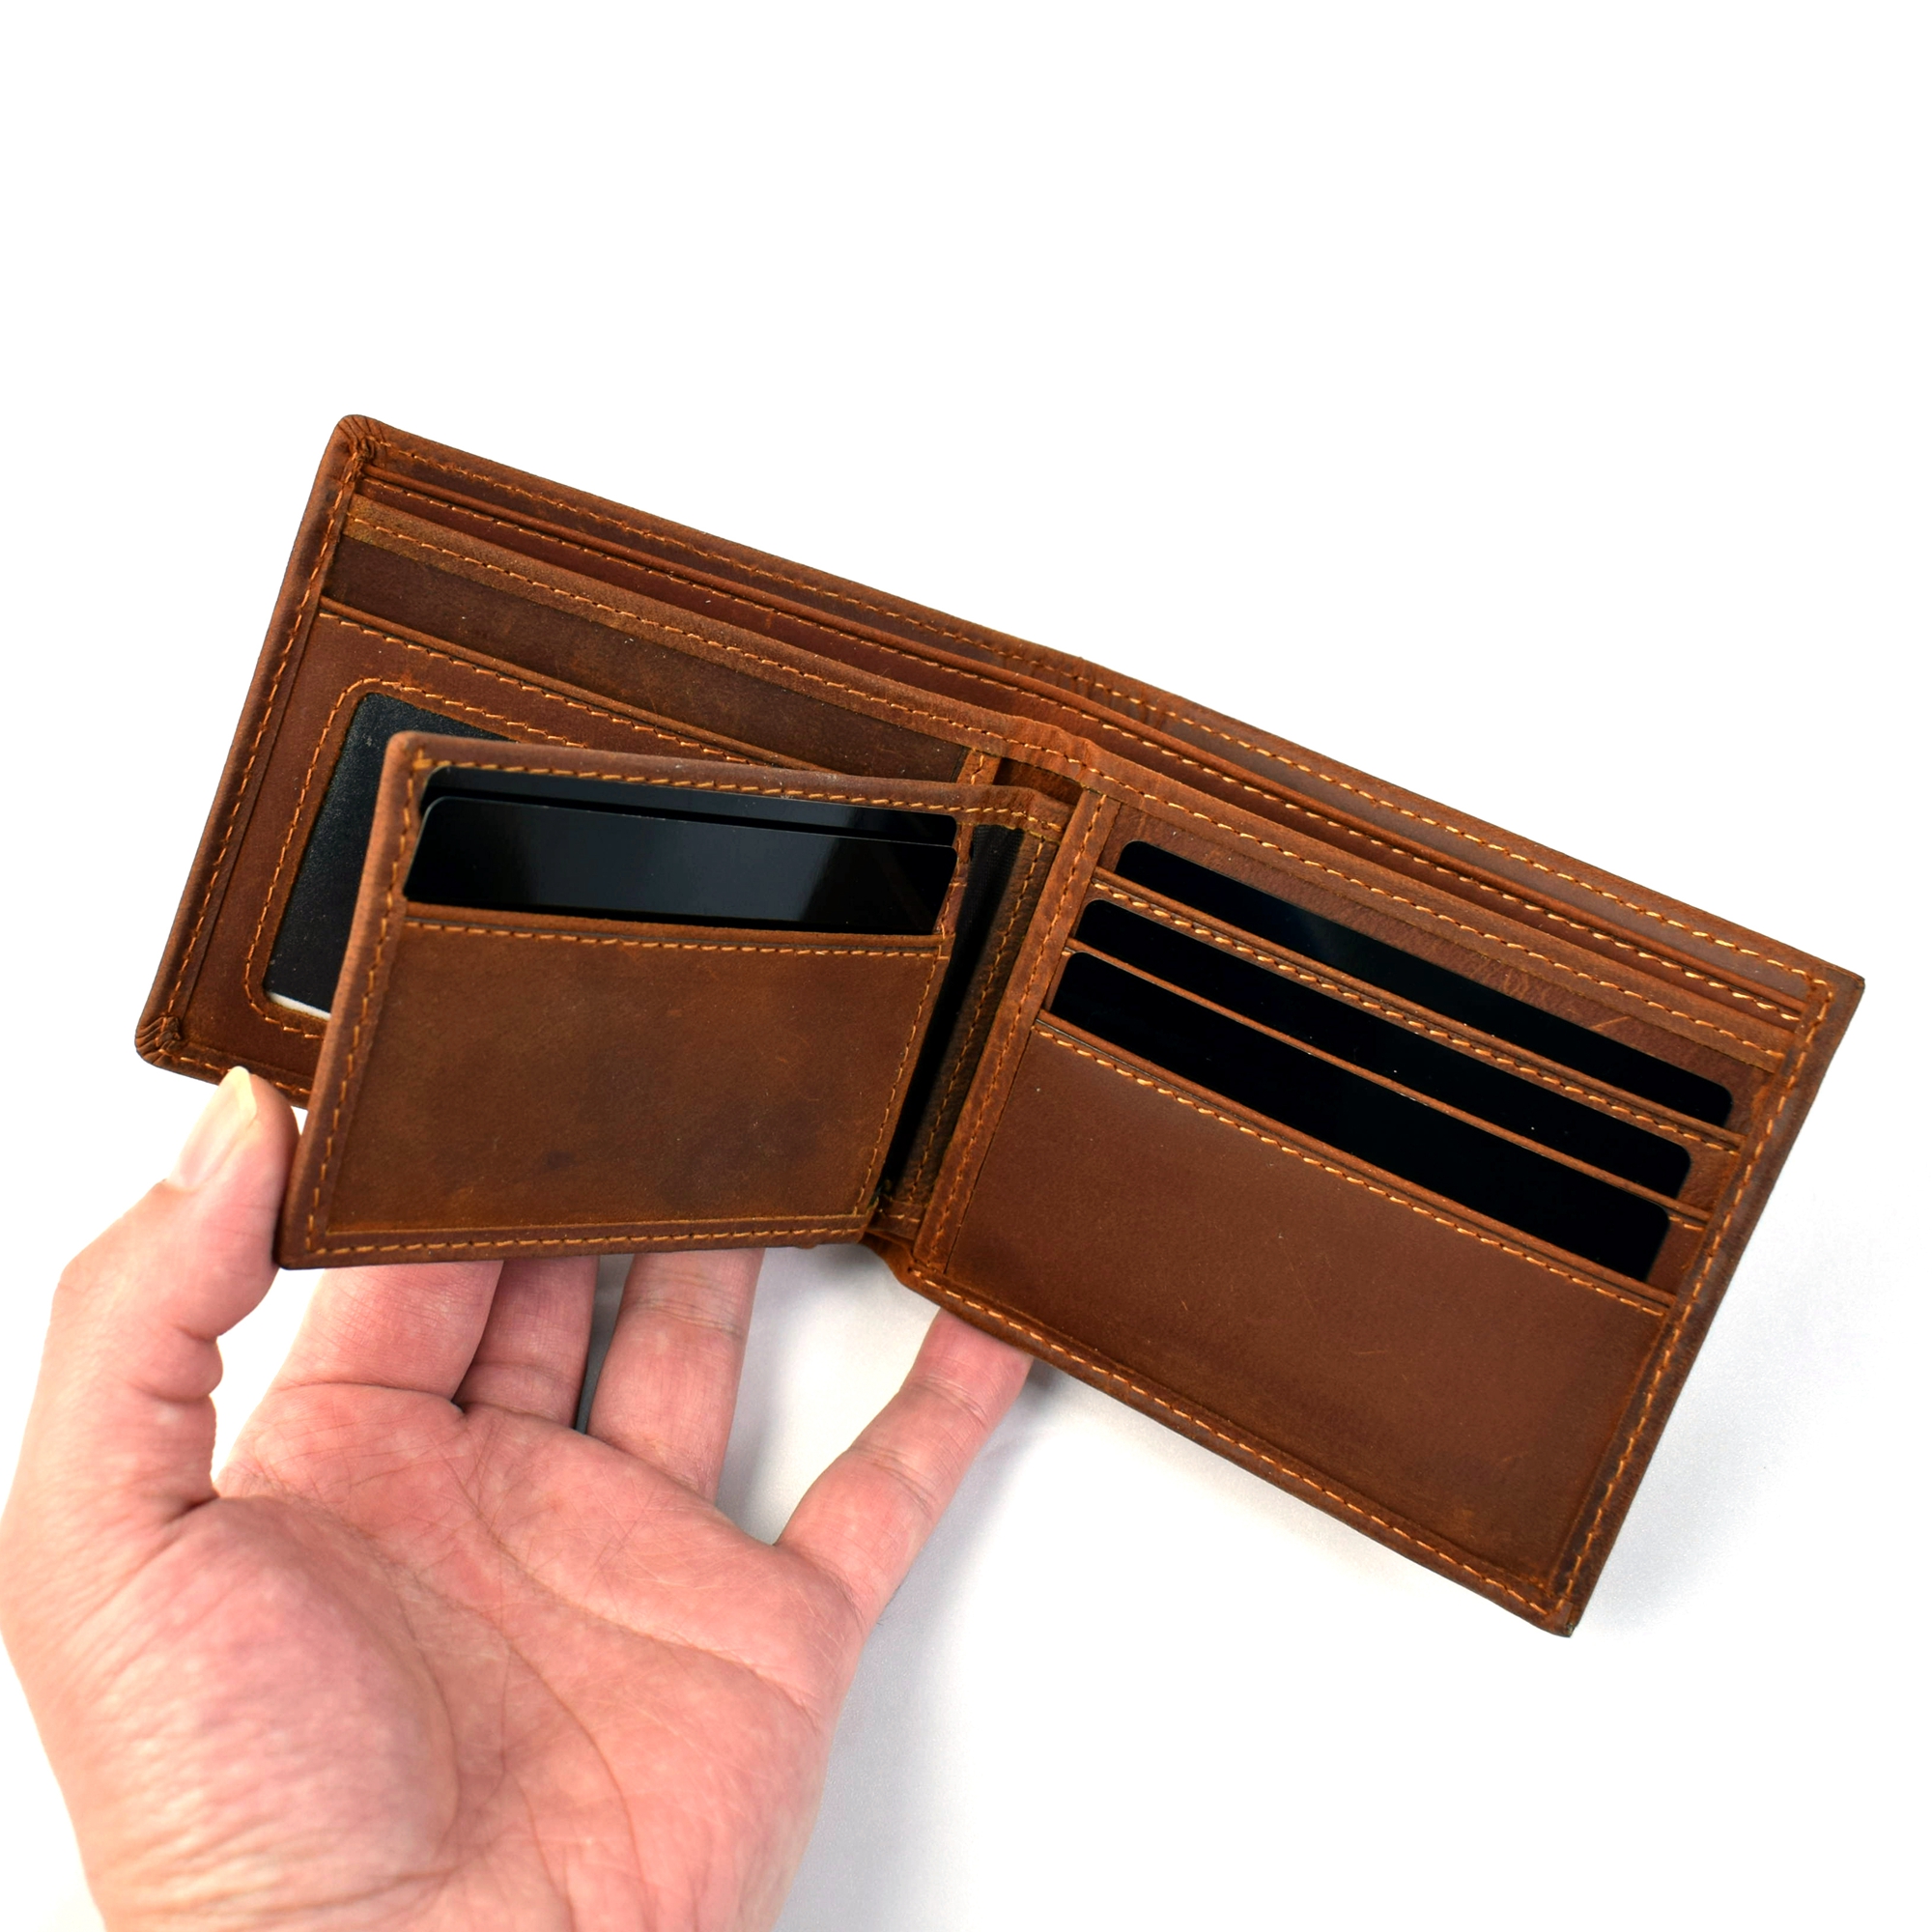 Men's Genuine Leather Wallet - Classic Leather Wallets with Vintage Style  and Ability  the Best Wallets for Men wallets for Men: The Perfect  Accessory for men Brown Wallets perfect gift for men